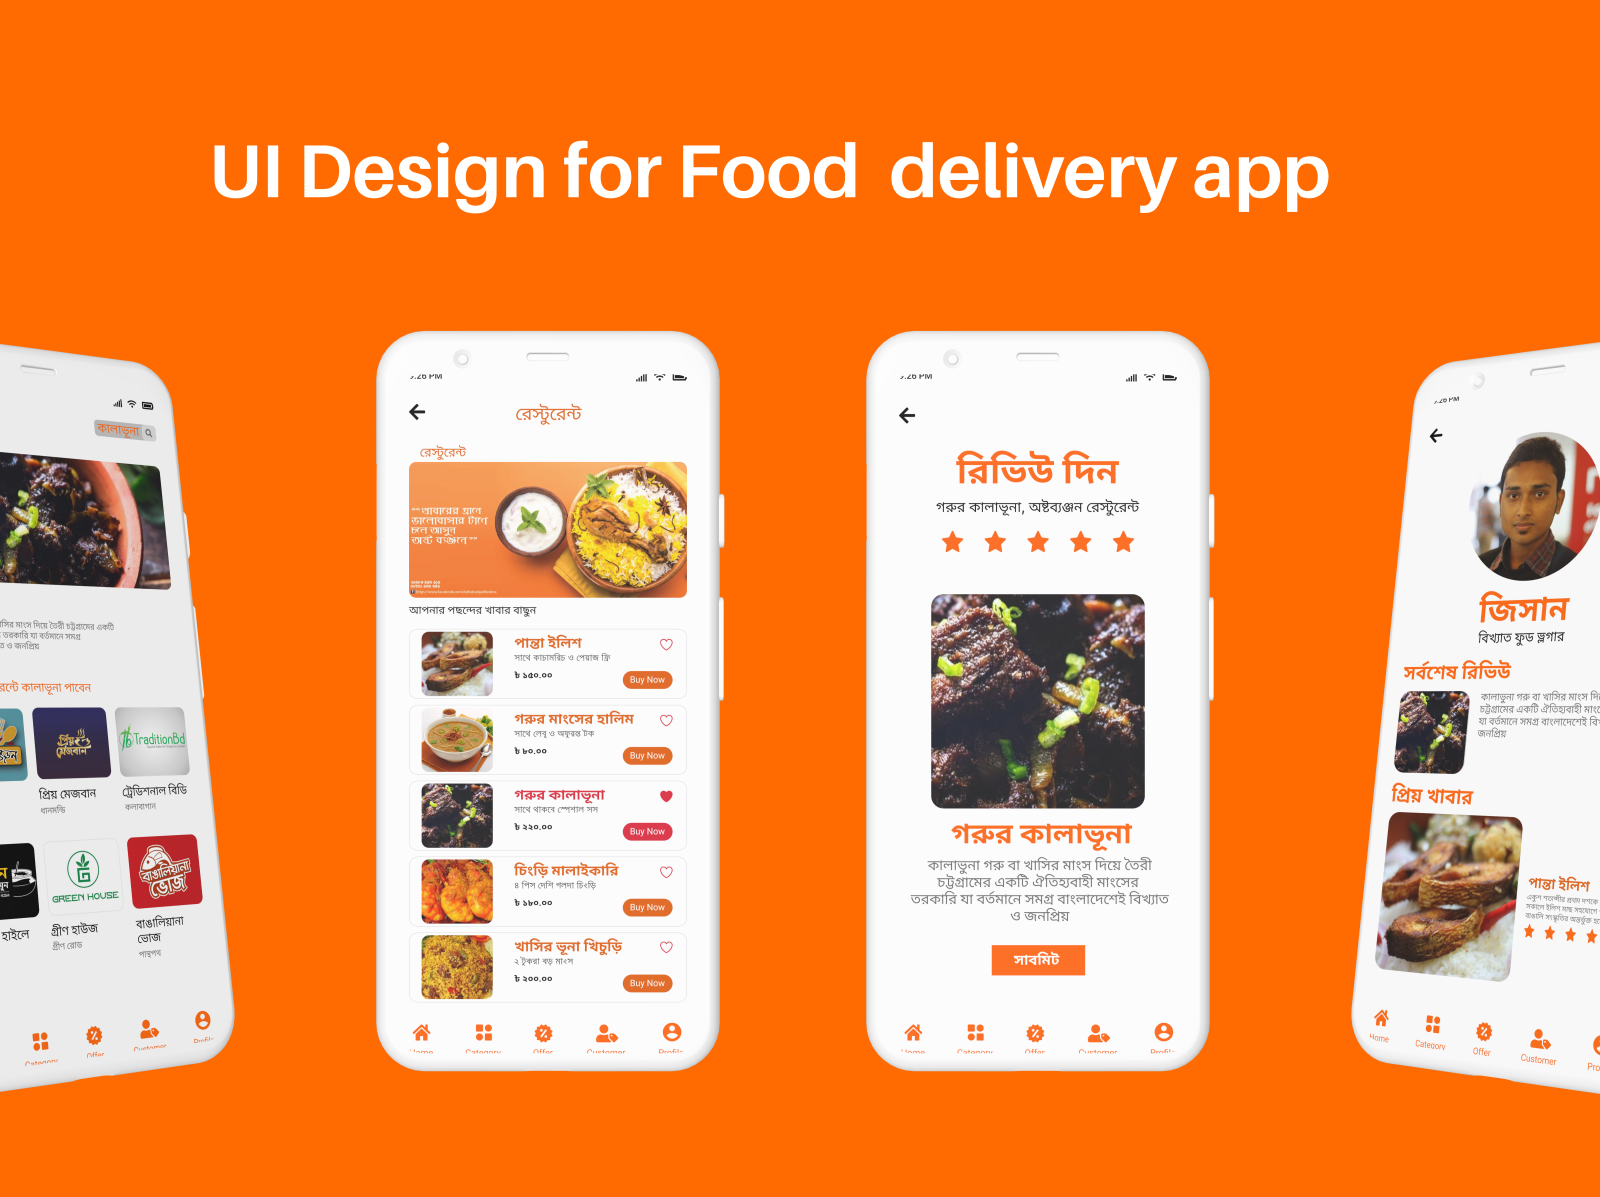 UI Design For Food Delivery Mobile Application By Mushfikur Rahaman On Dribbble